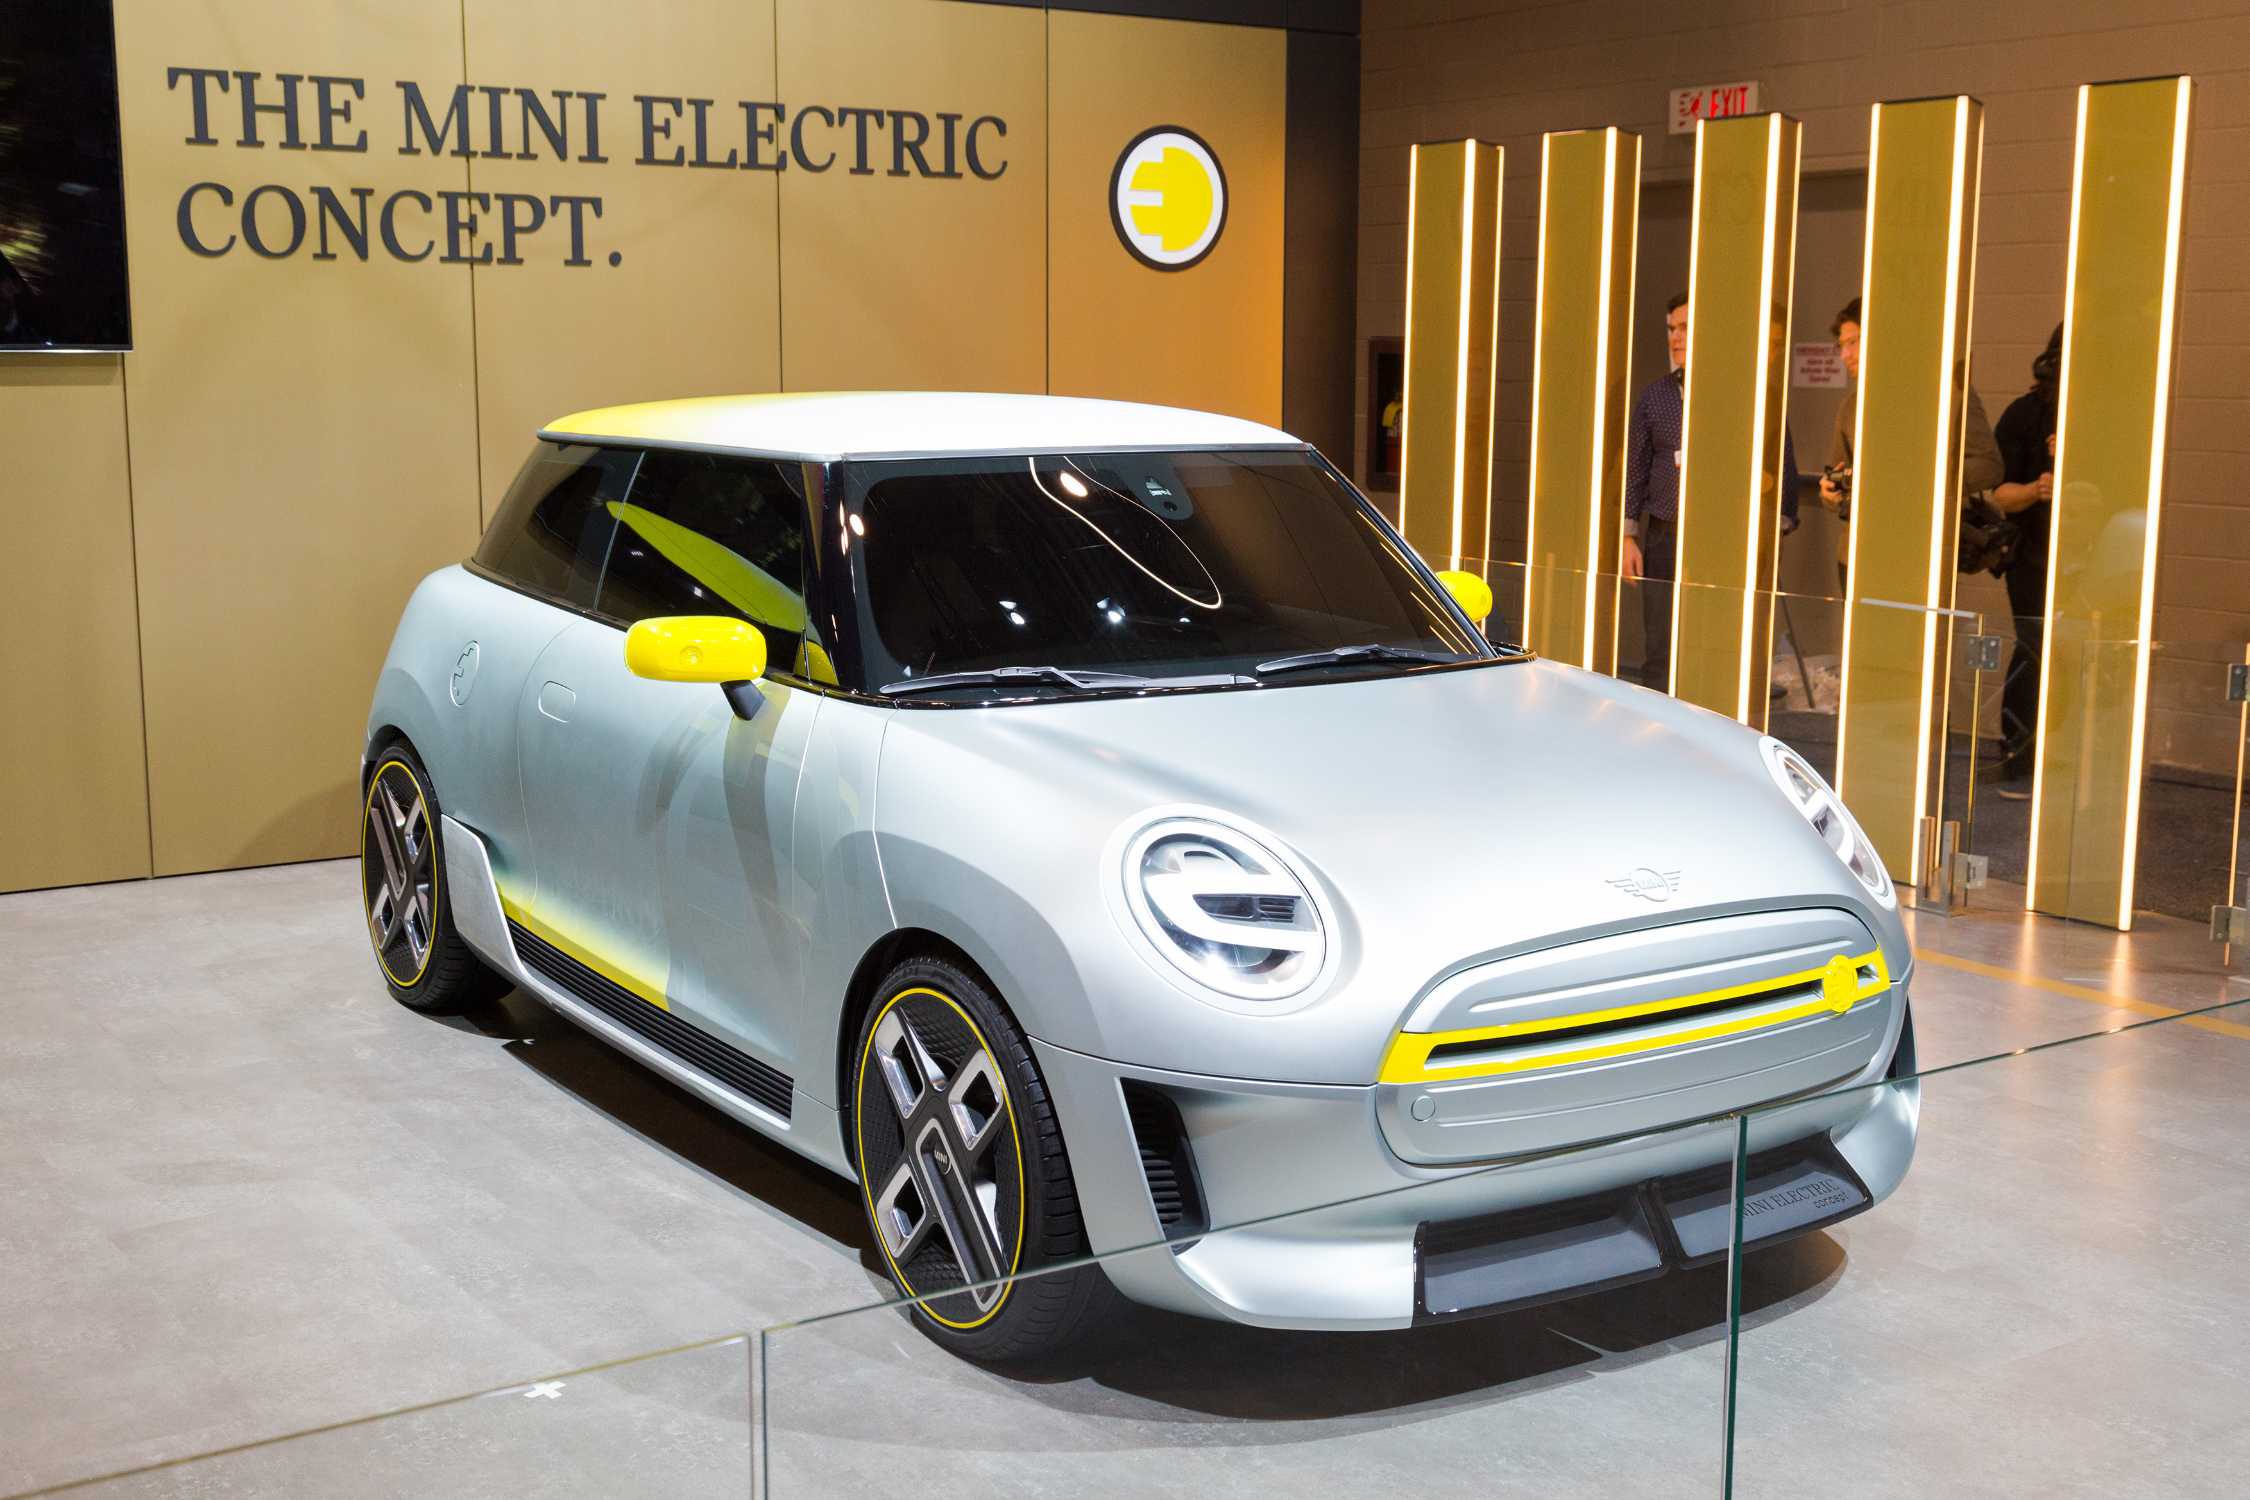 MINI Canada proudly presents the Canadian premiere of the MINI Electric Concept (03/2018)